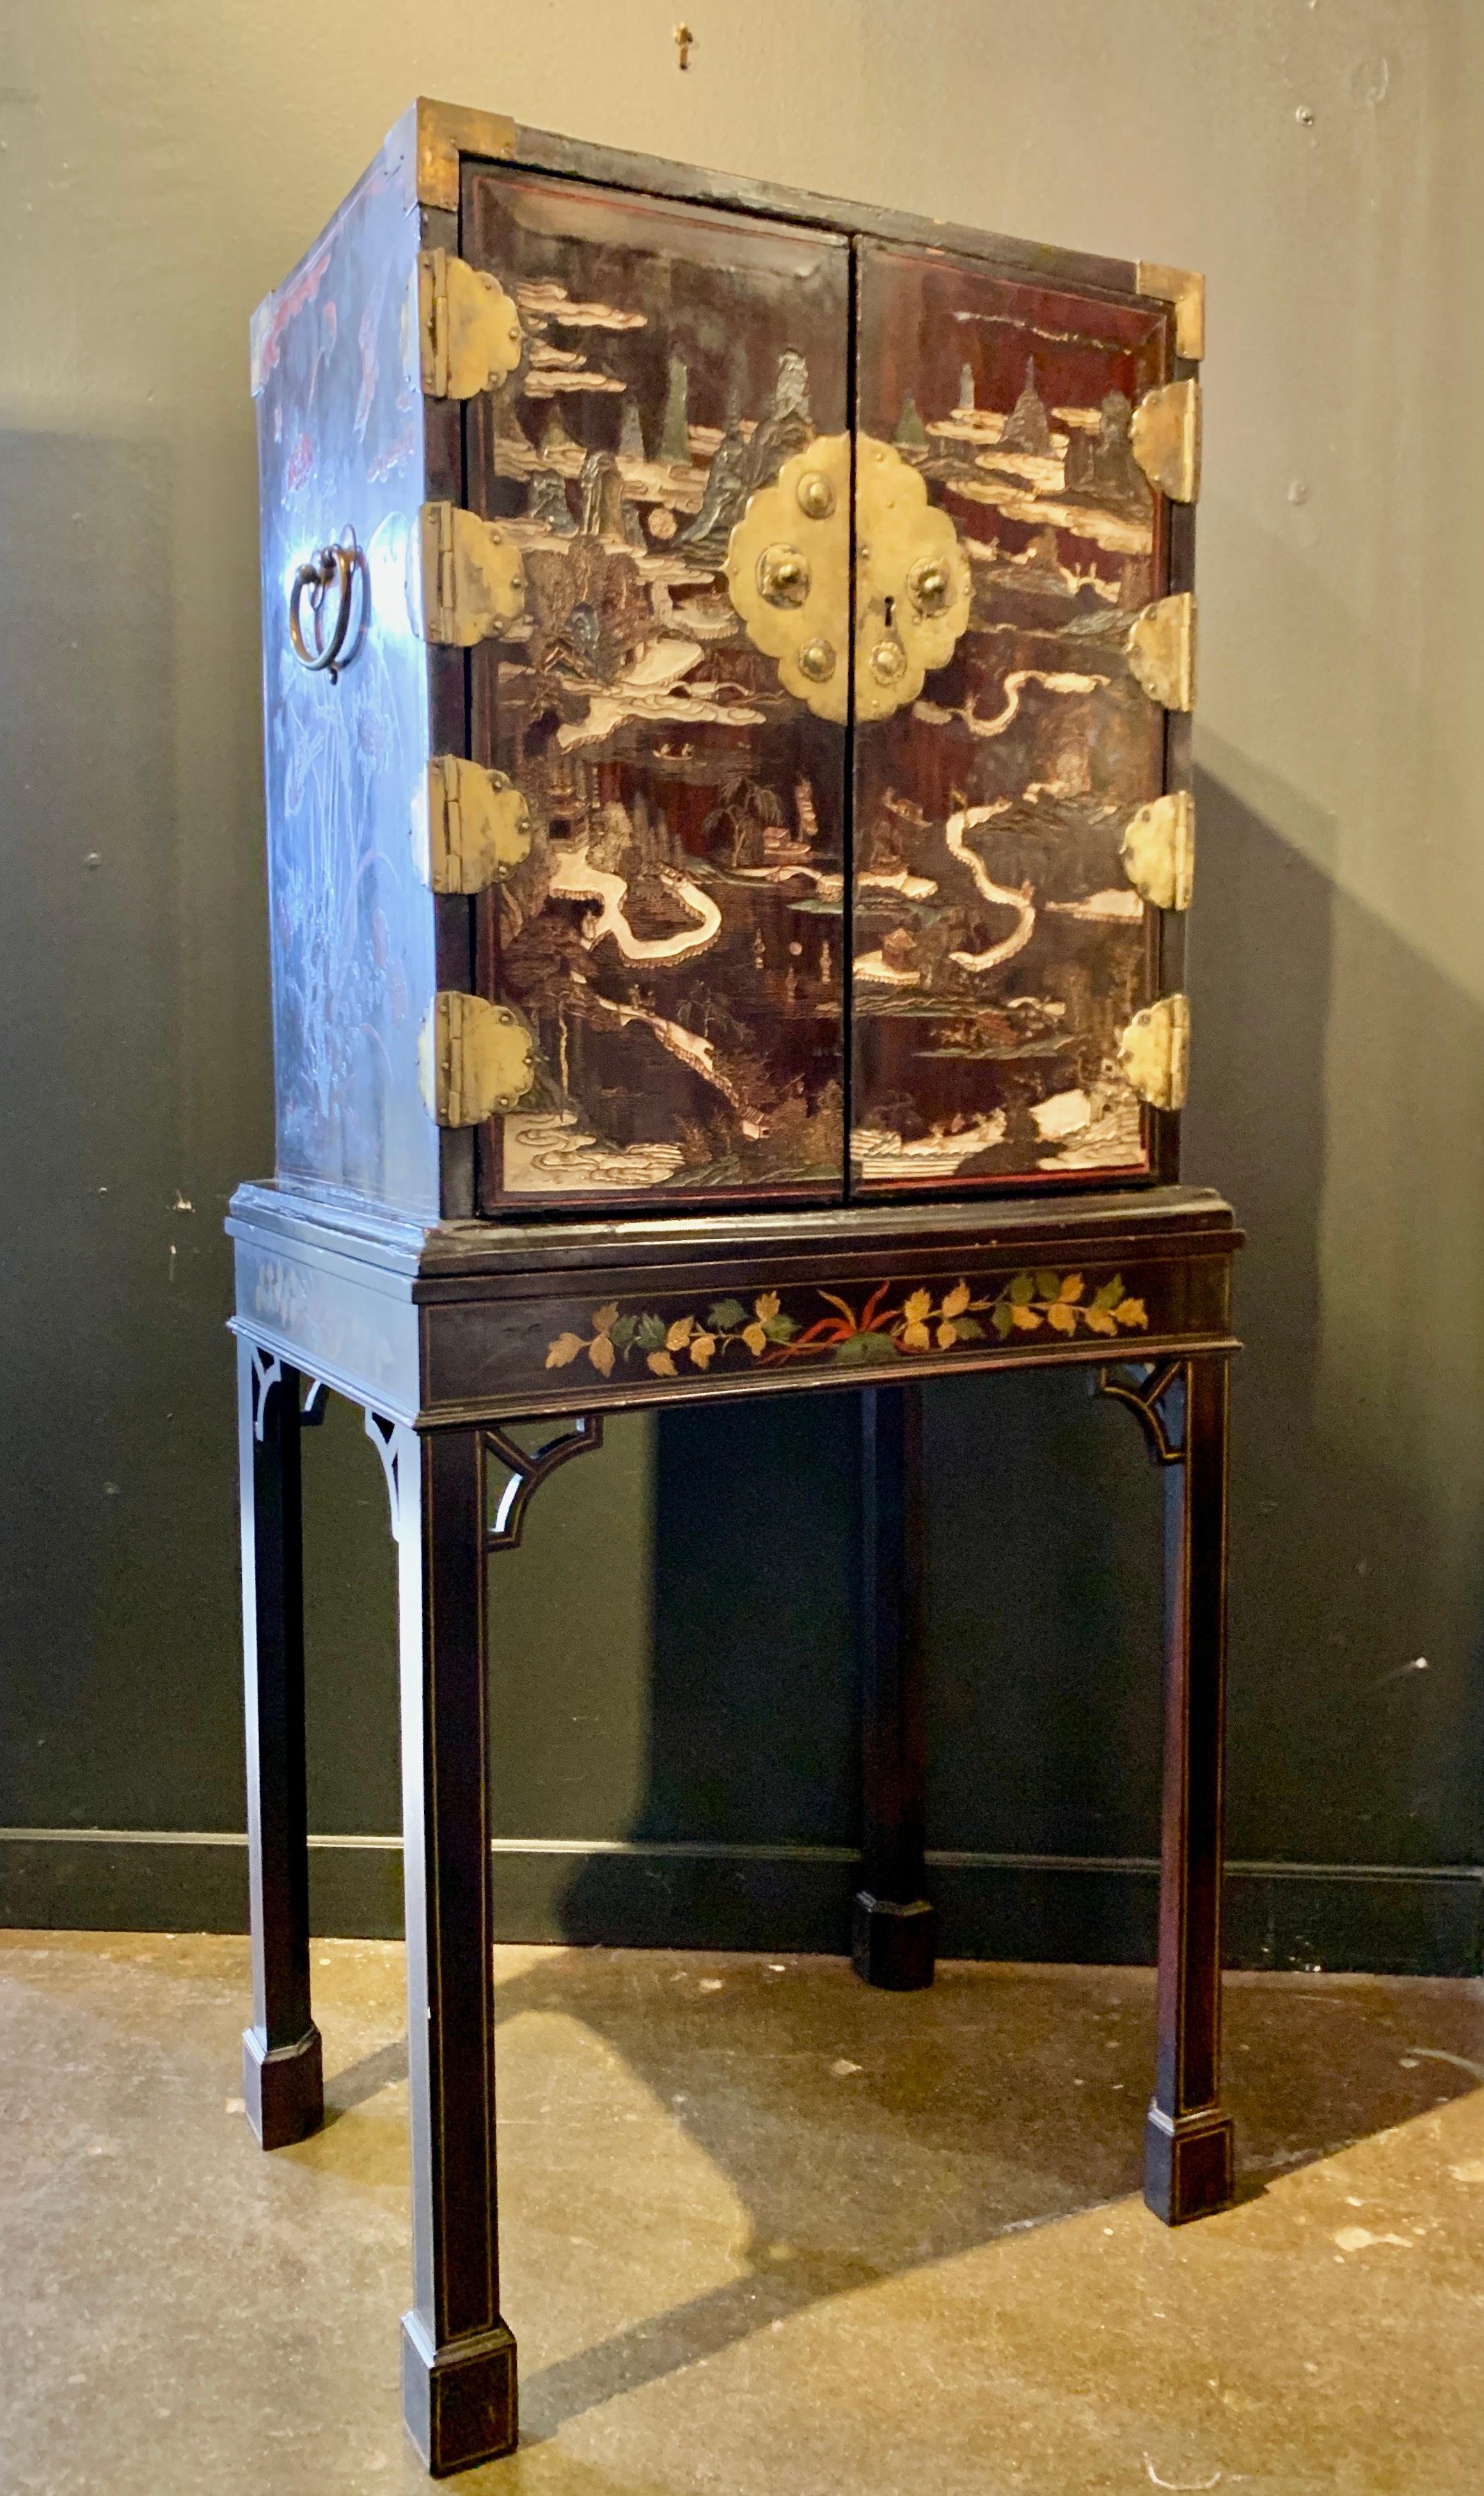 A delightful Chinese coromandel brown lacquer cabinet on stand, made for the export market, early to mid-19th century, China, presented on an early 20th century custom fitted stand. 

The gem of a cabinet is fitted with doors and drawers, and